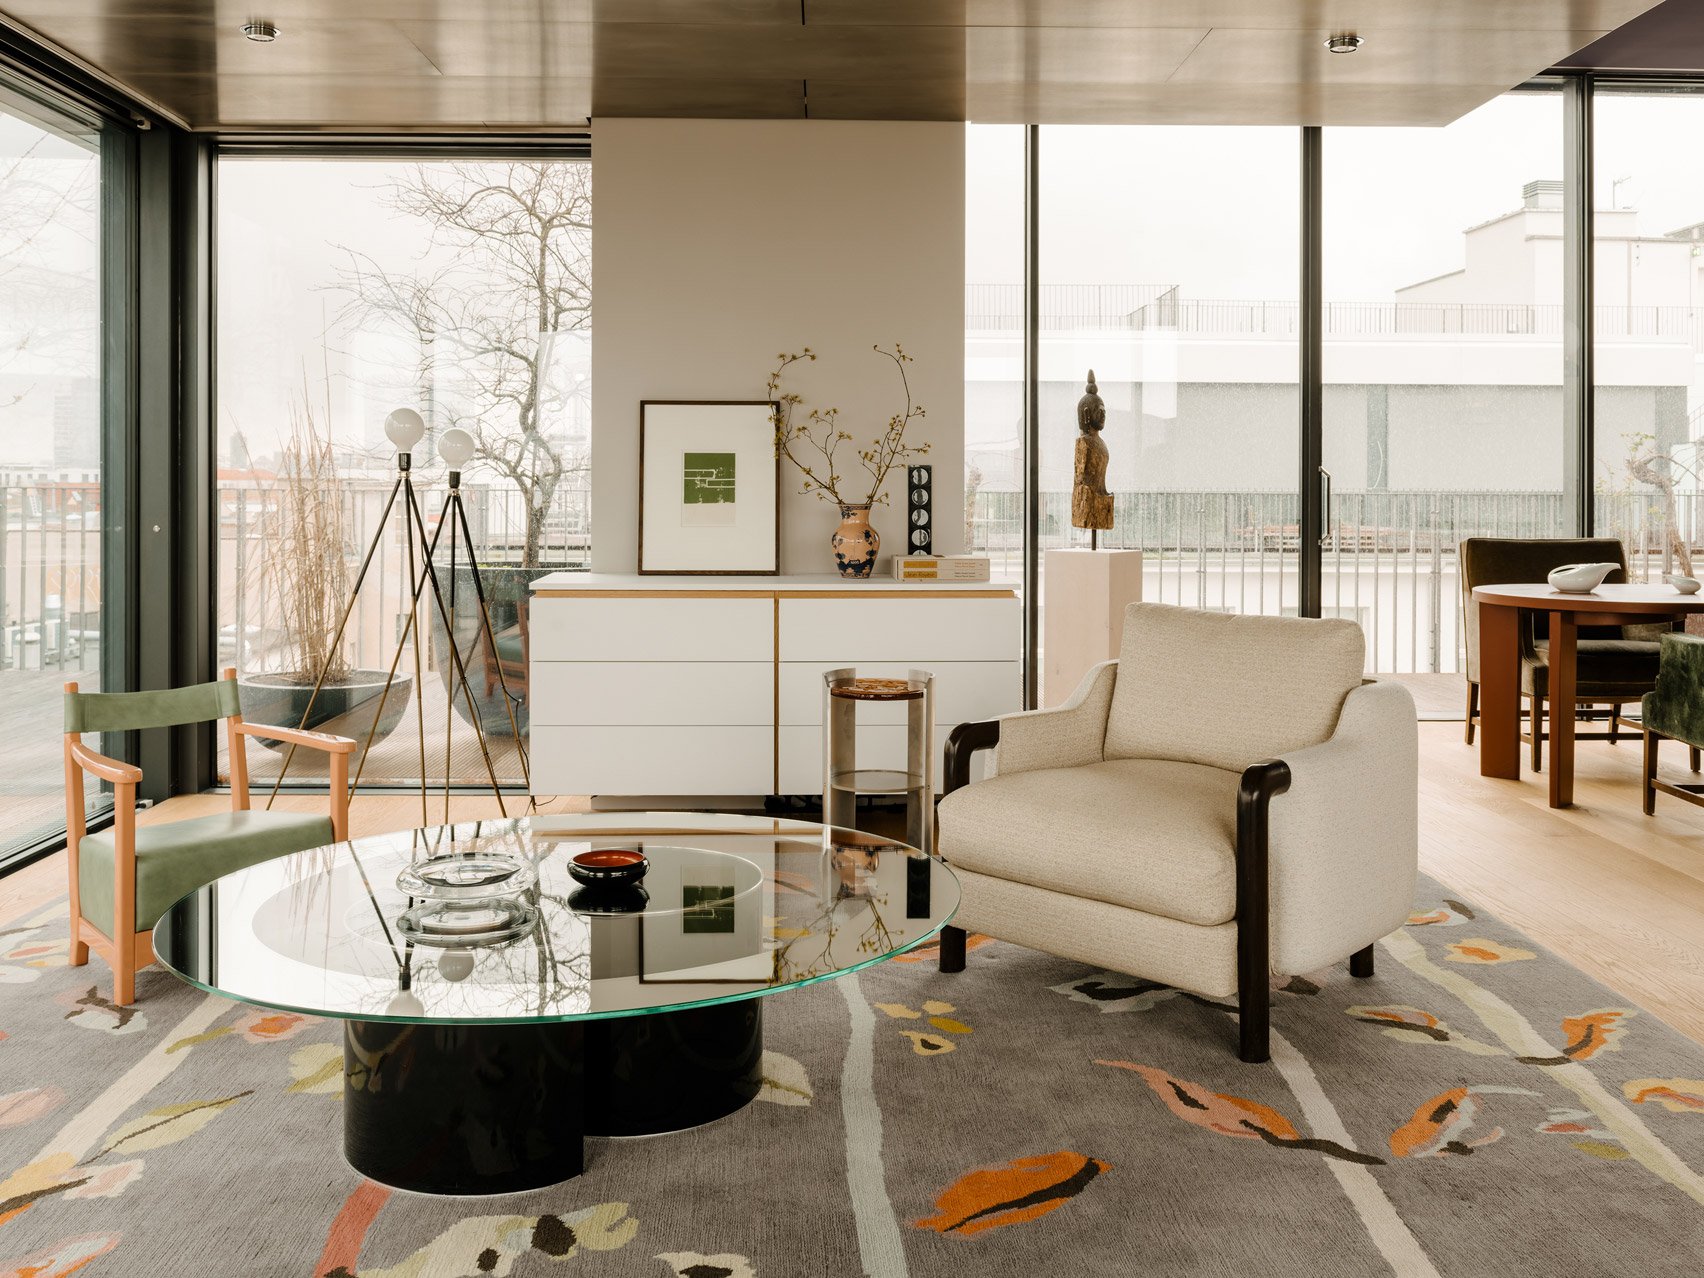 Living room inside Berlin apartment designed by Gisbert Poppler with a grey patterned rug and two armchairs around a glass table 